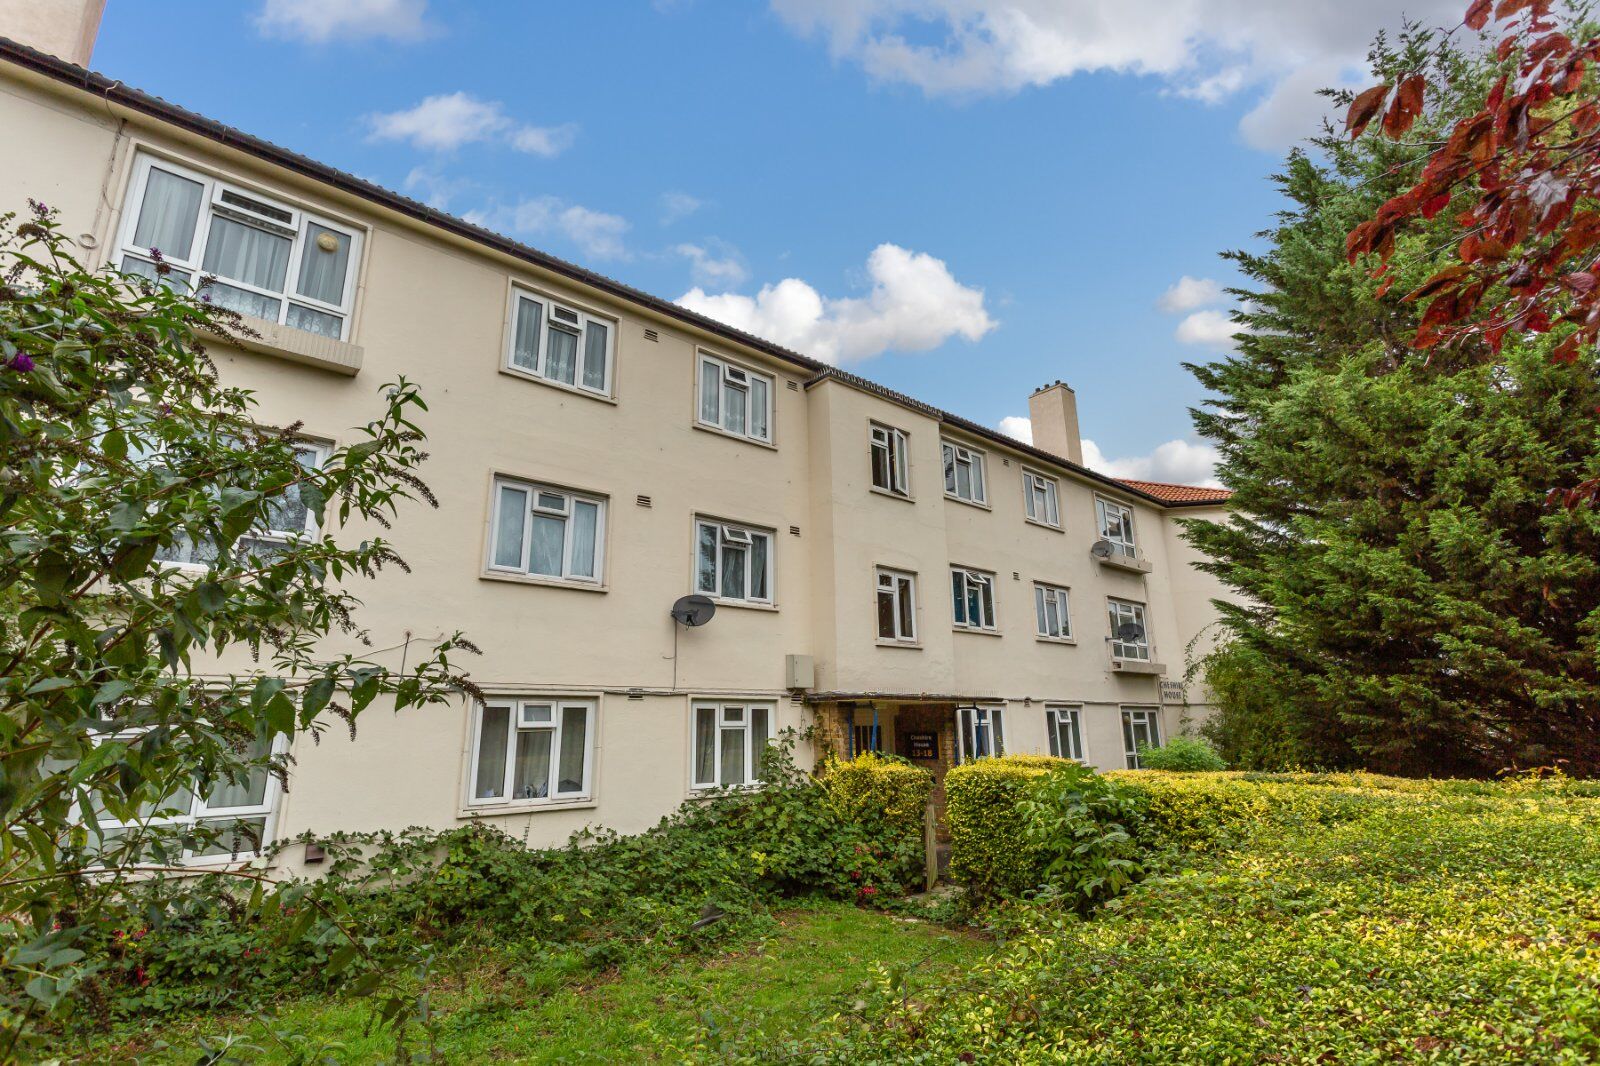 3 bedroom  flat for sale Cheshire House, Green Lane, SM4, main image